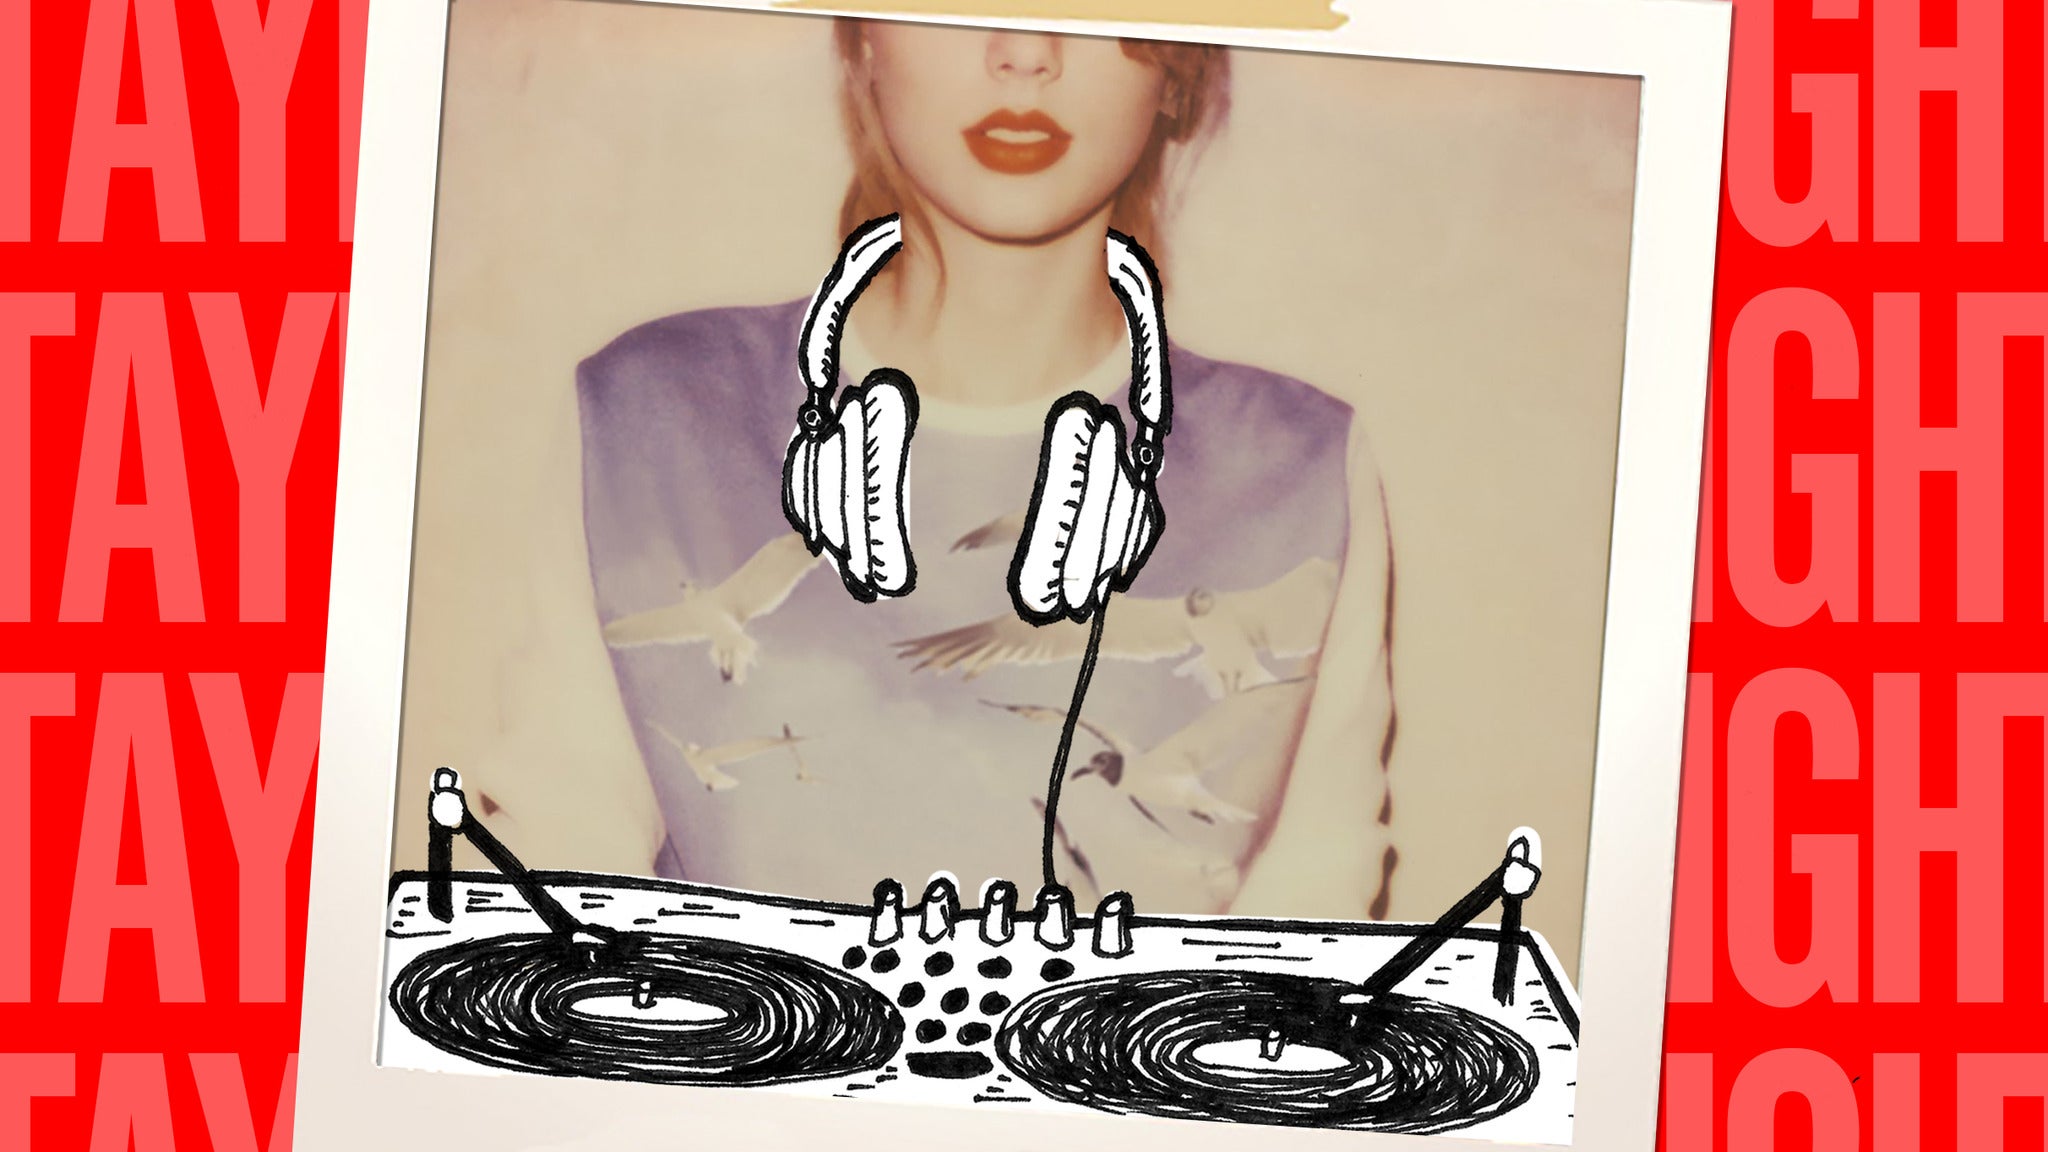 Taylor Swift Night - A Taylor Swift Inspired Dance Party in Charlotte promo photo for Citi® Cardmember presale offer code